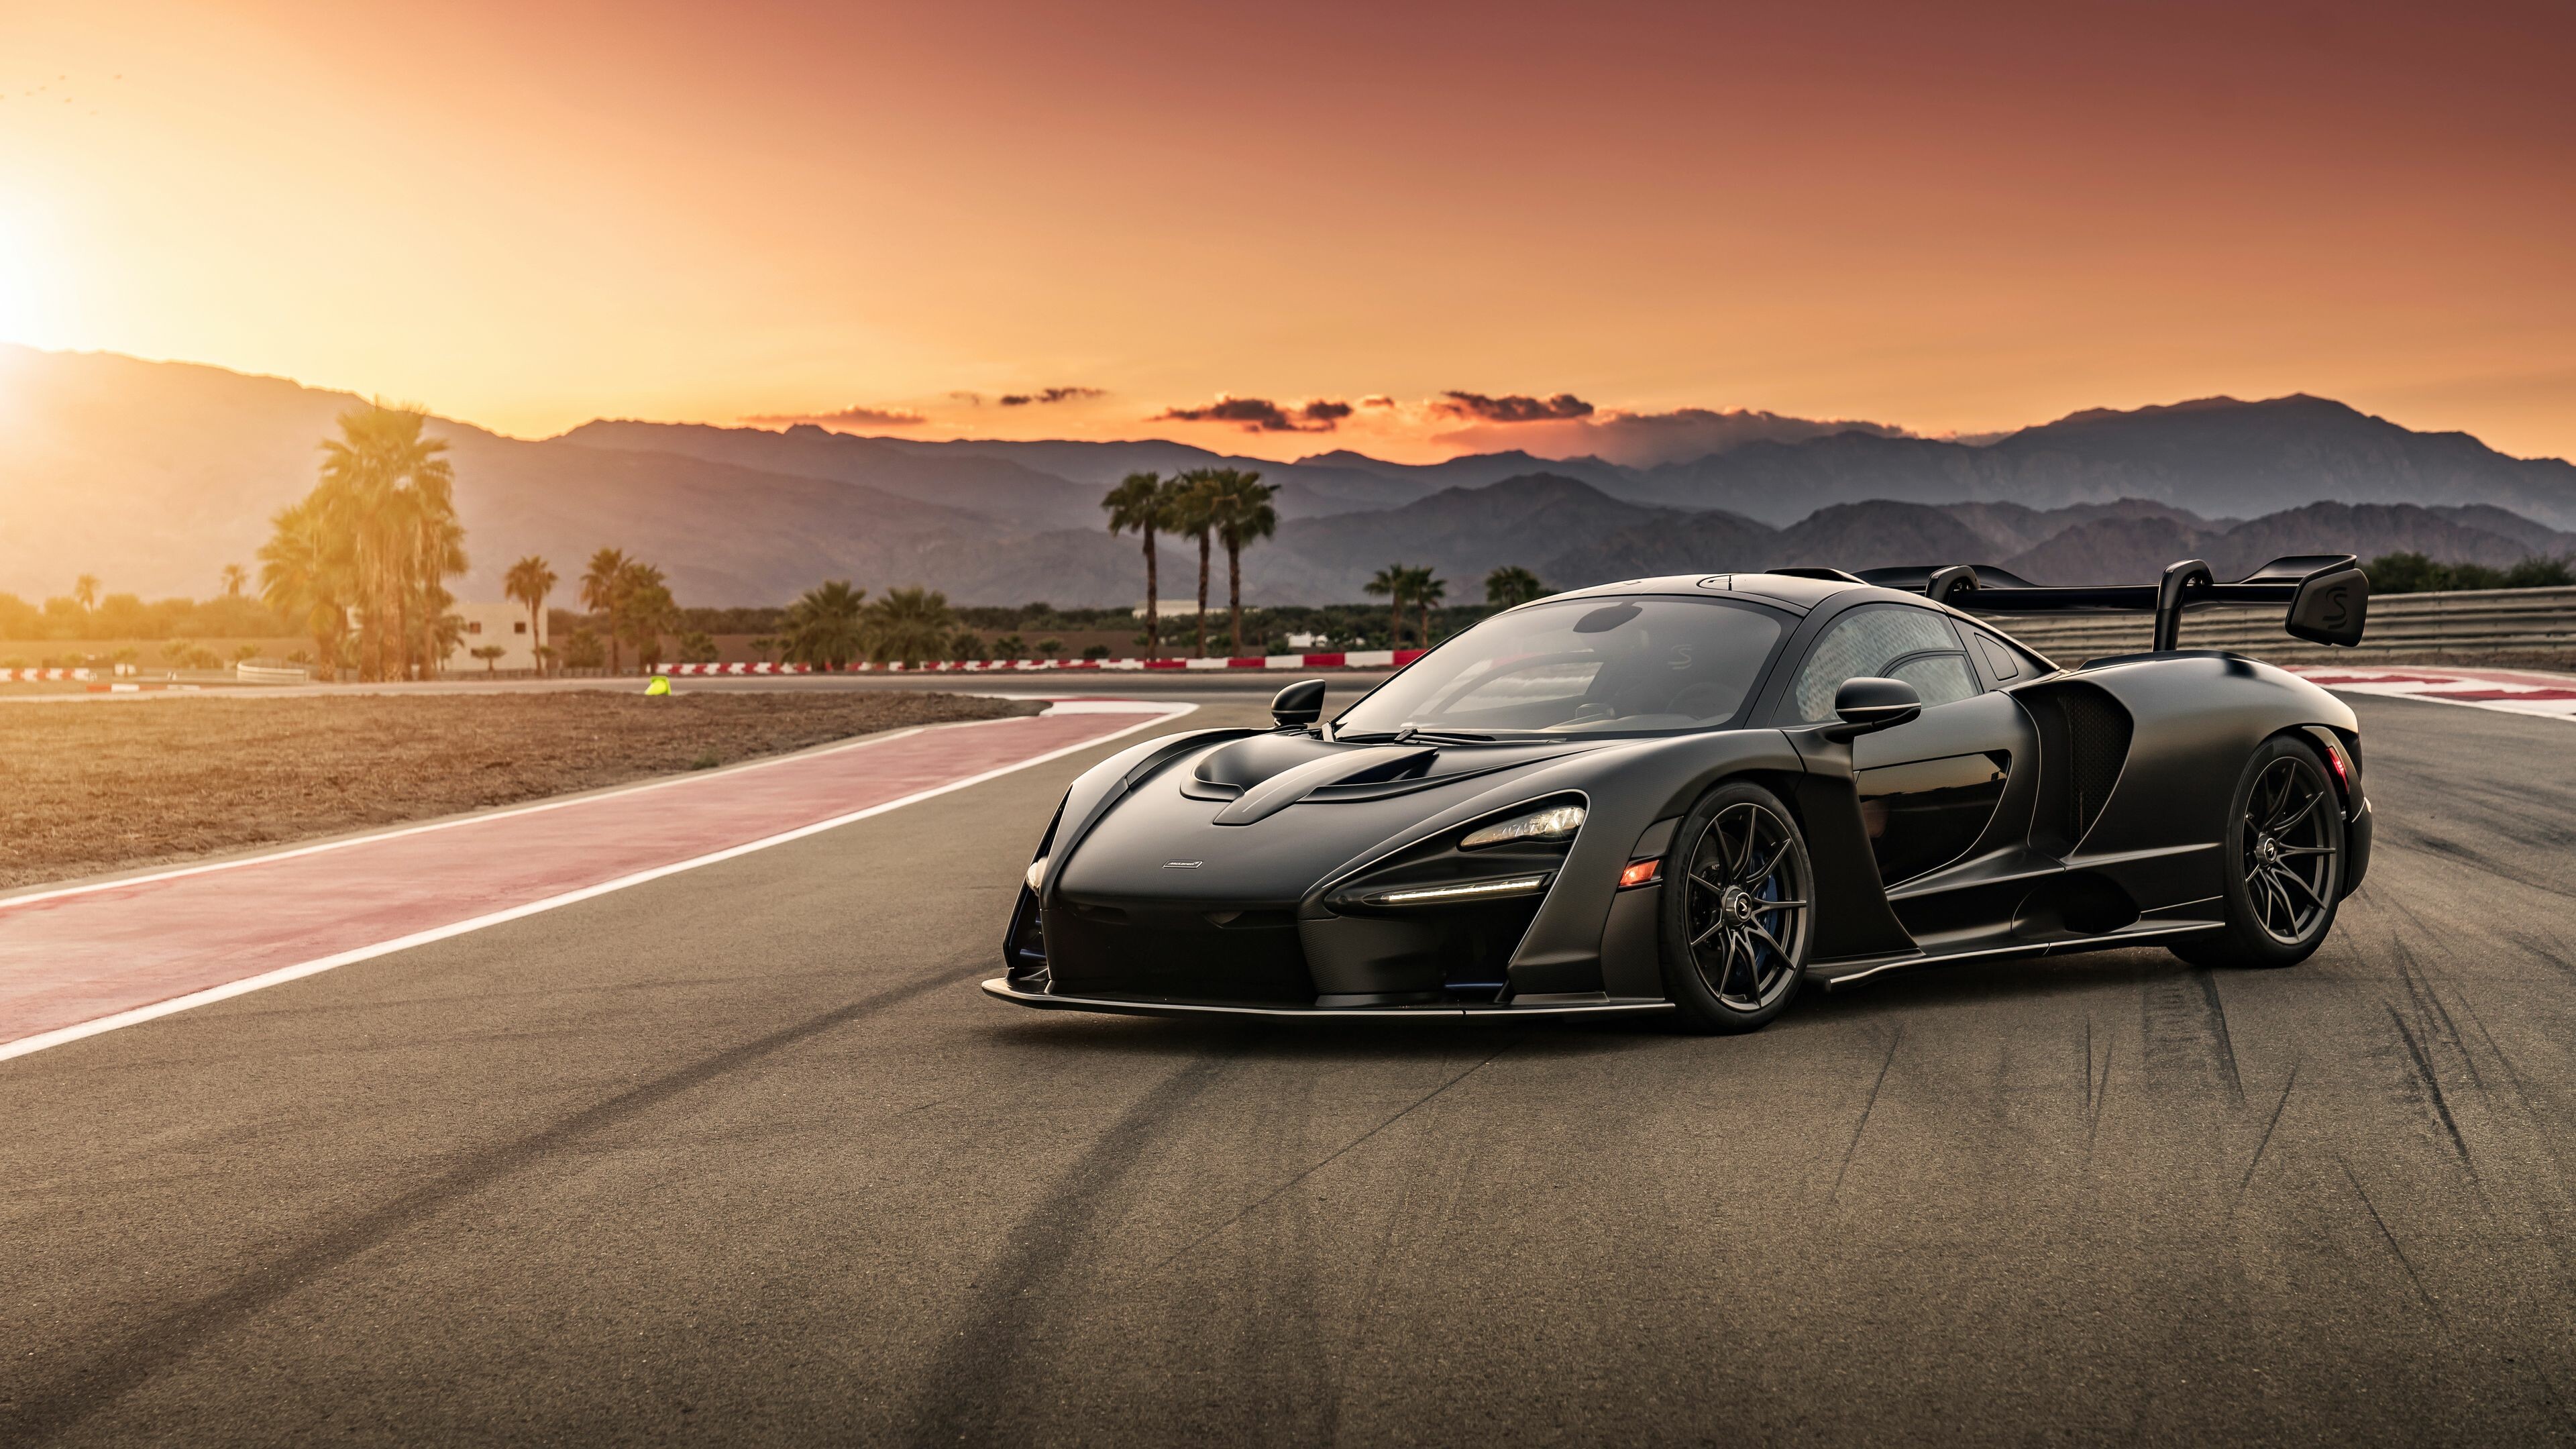 McLaren: Senna, A limited-production mid-engined sports car, A British automaker. 3840x2160 4K Wallpaper.